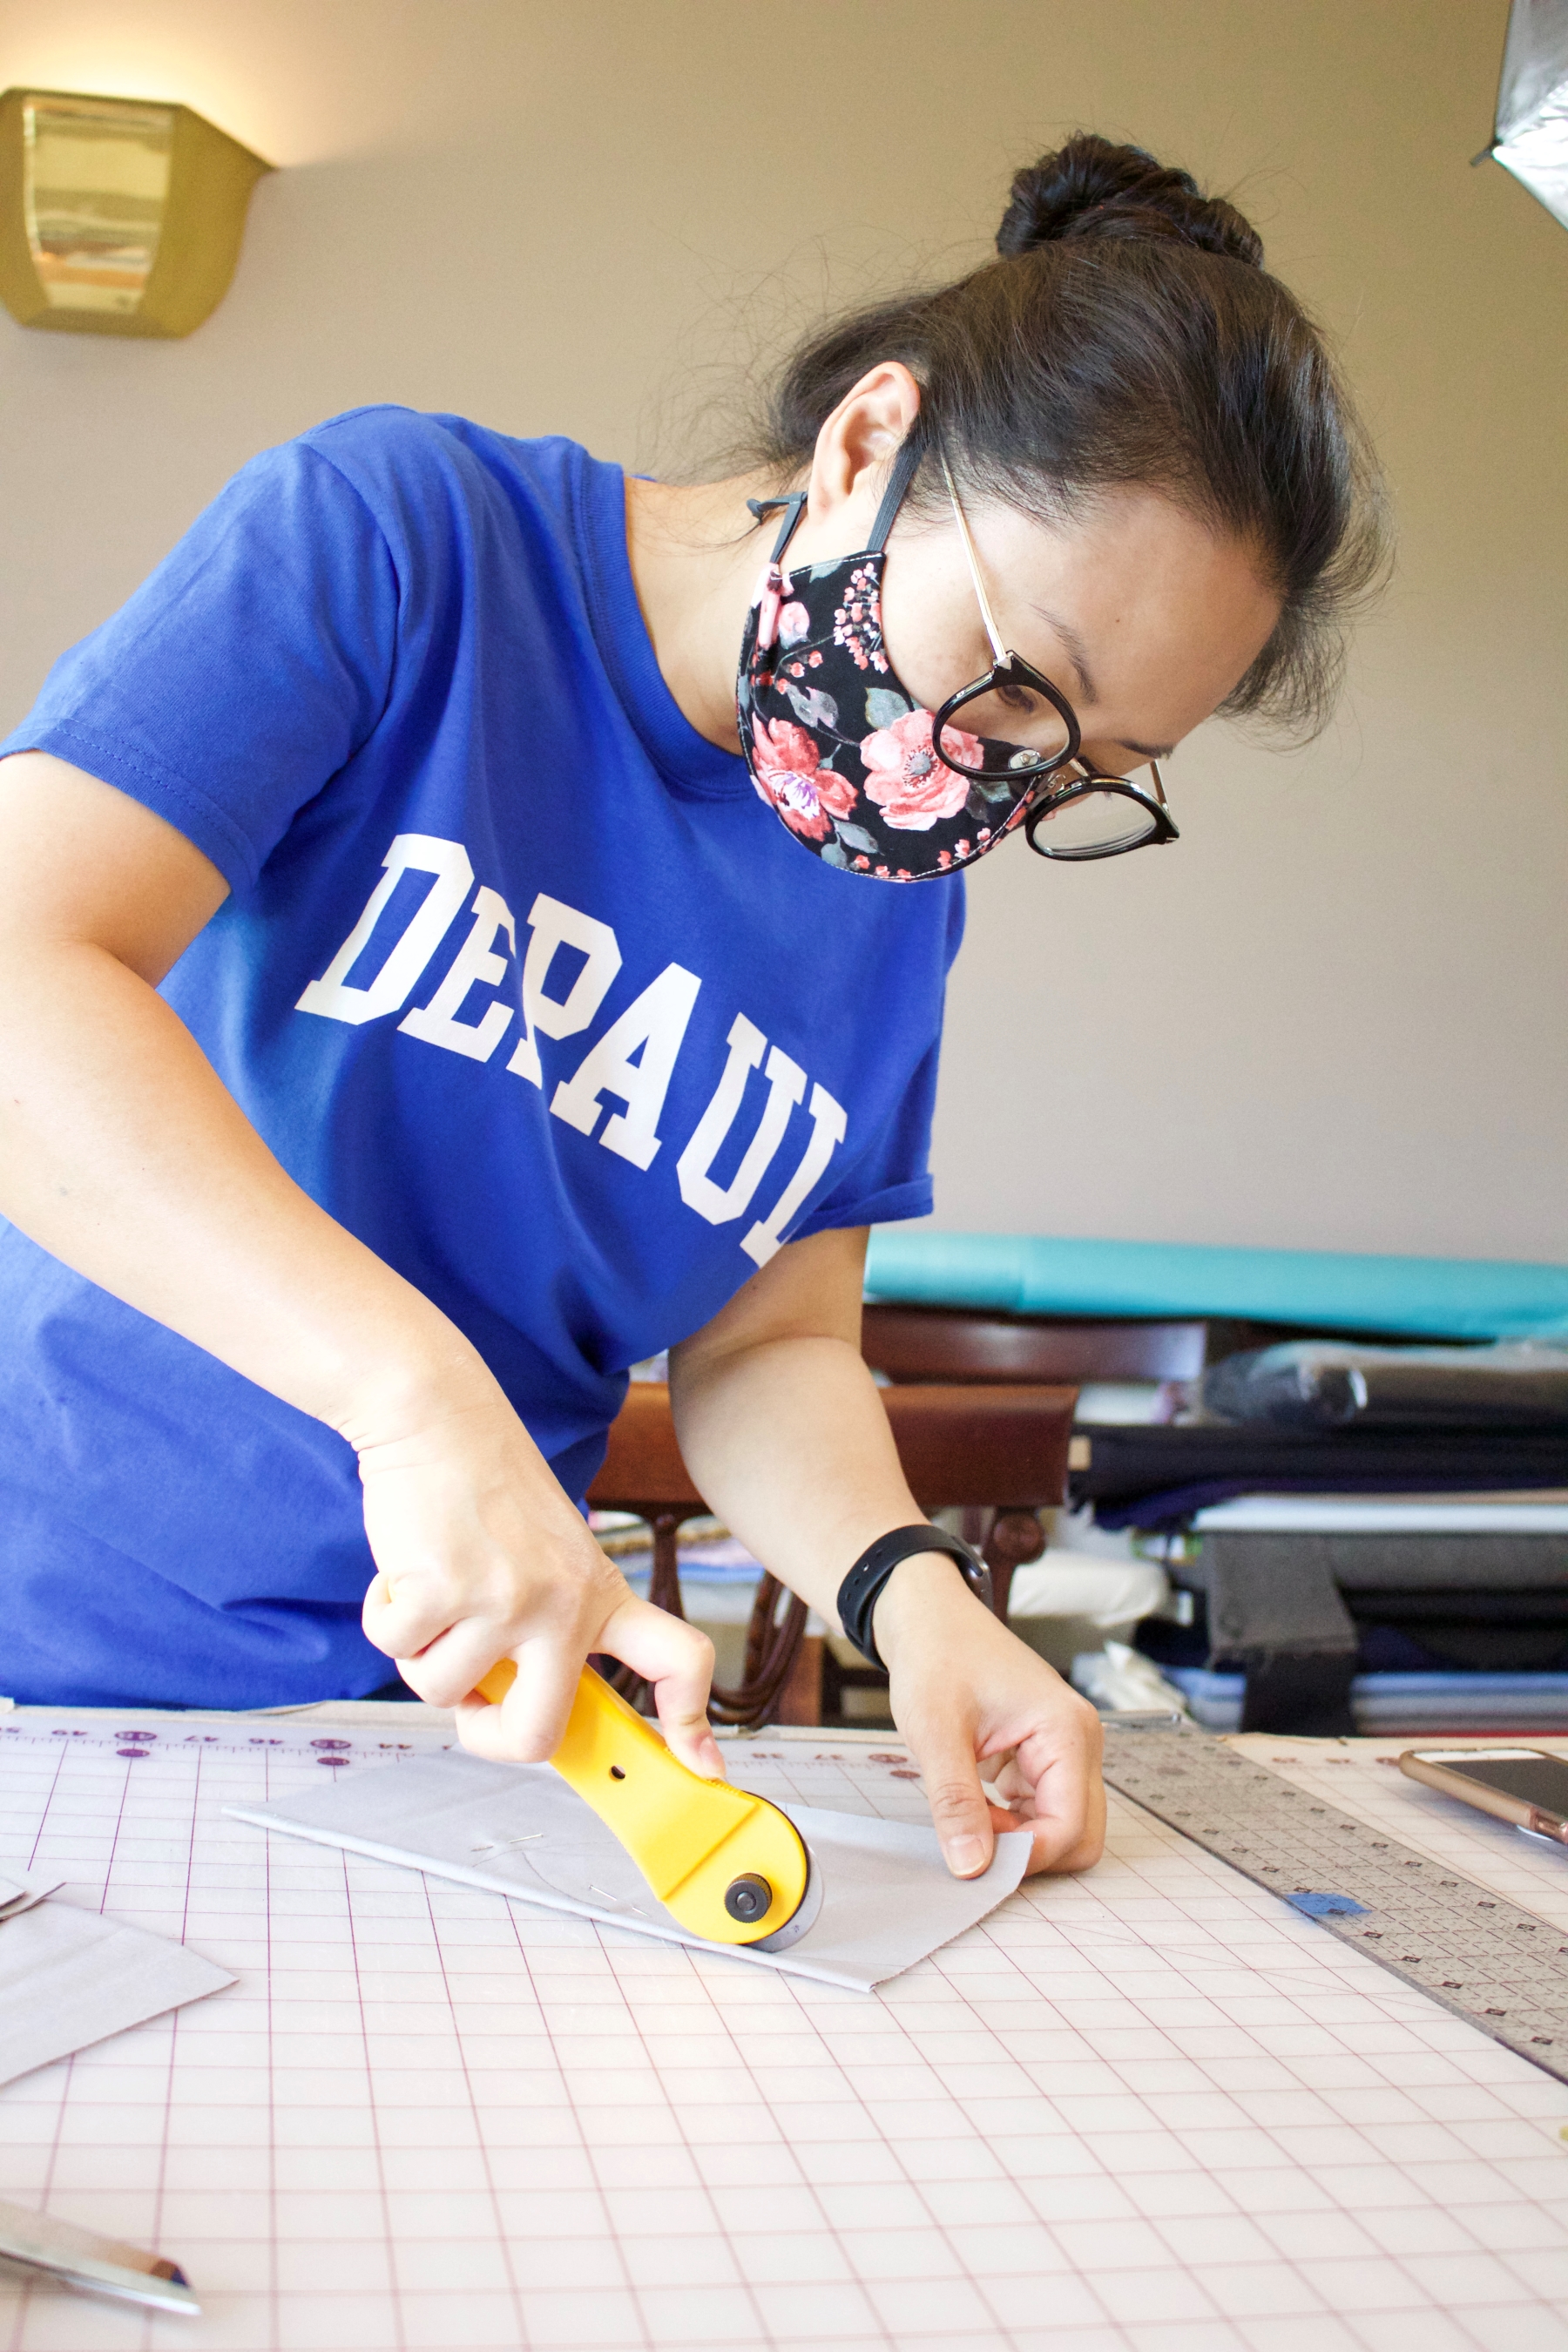 So Hui Nye (pictured) takes the lead on production while Lauren Pingad manages operations and marketing for their company Fashion Masks, which sells premium quality face masks.